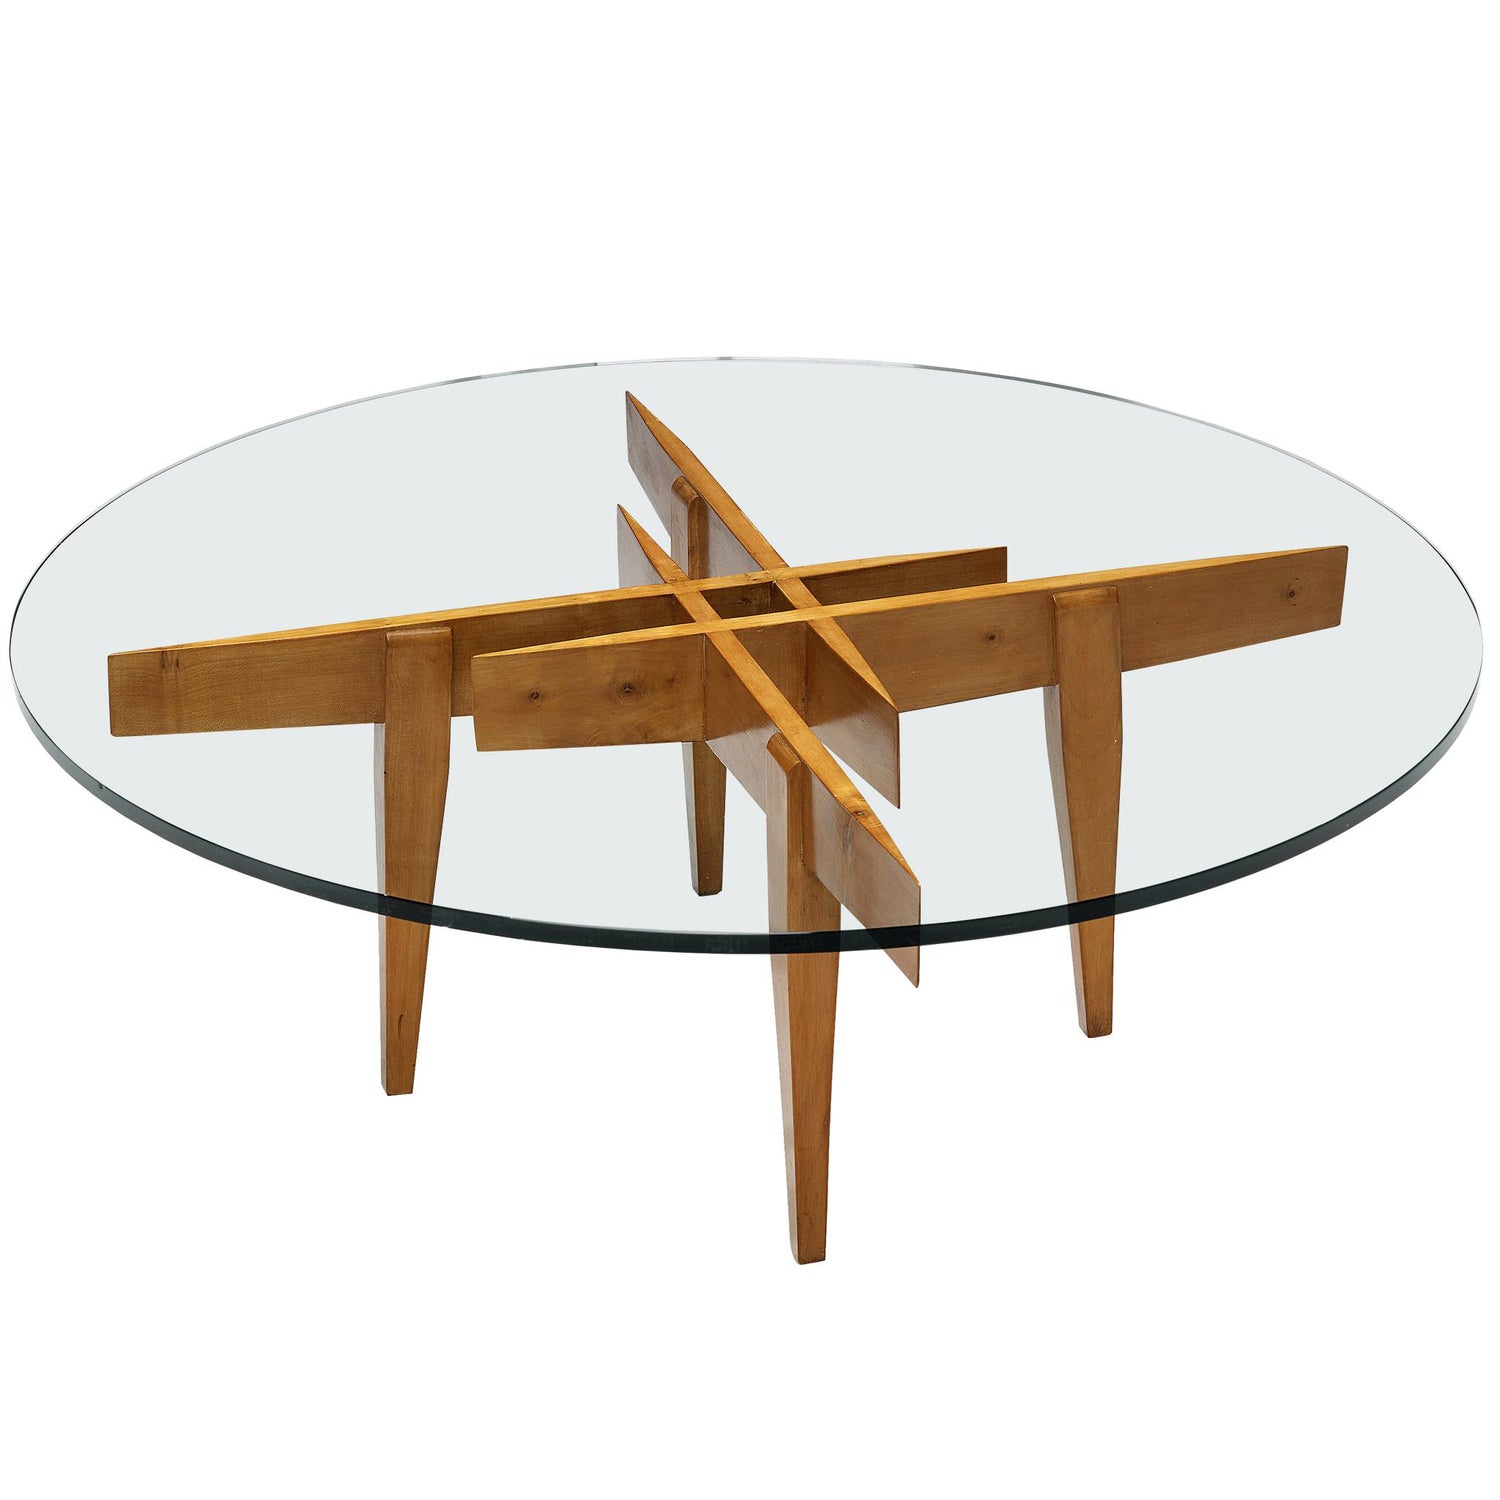 Gio Ponti Low Table Manufactured by Giordano Chiesa with expertise, Milano  1956 For Sale at 1stDibs